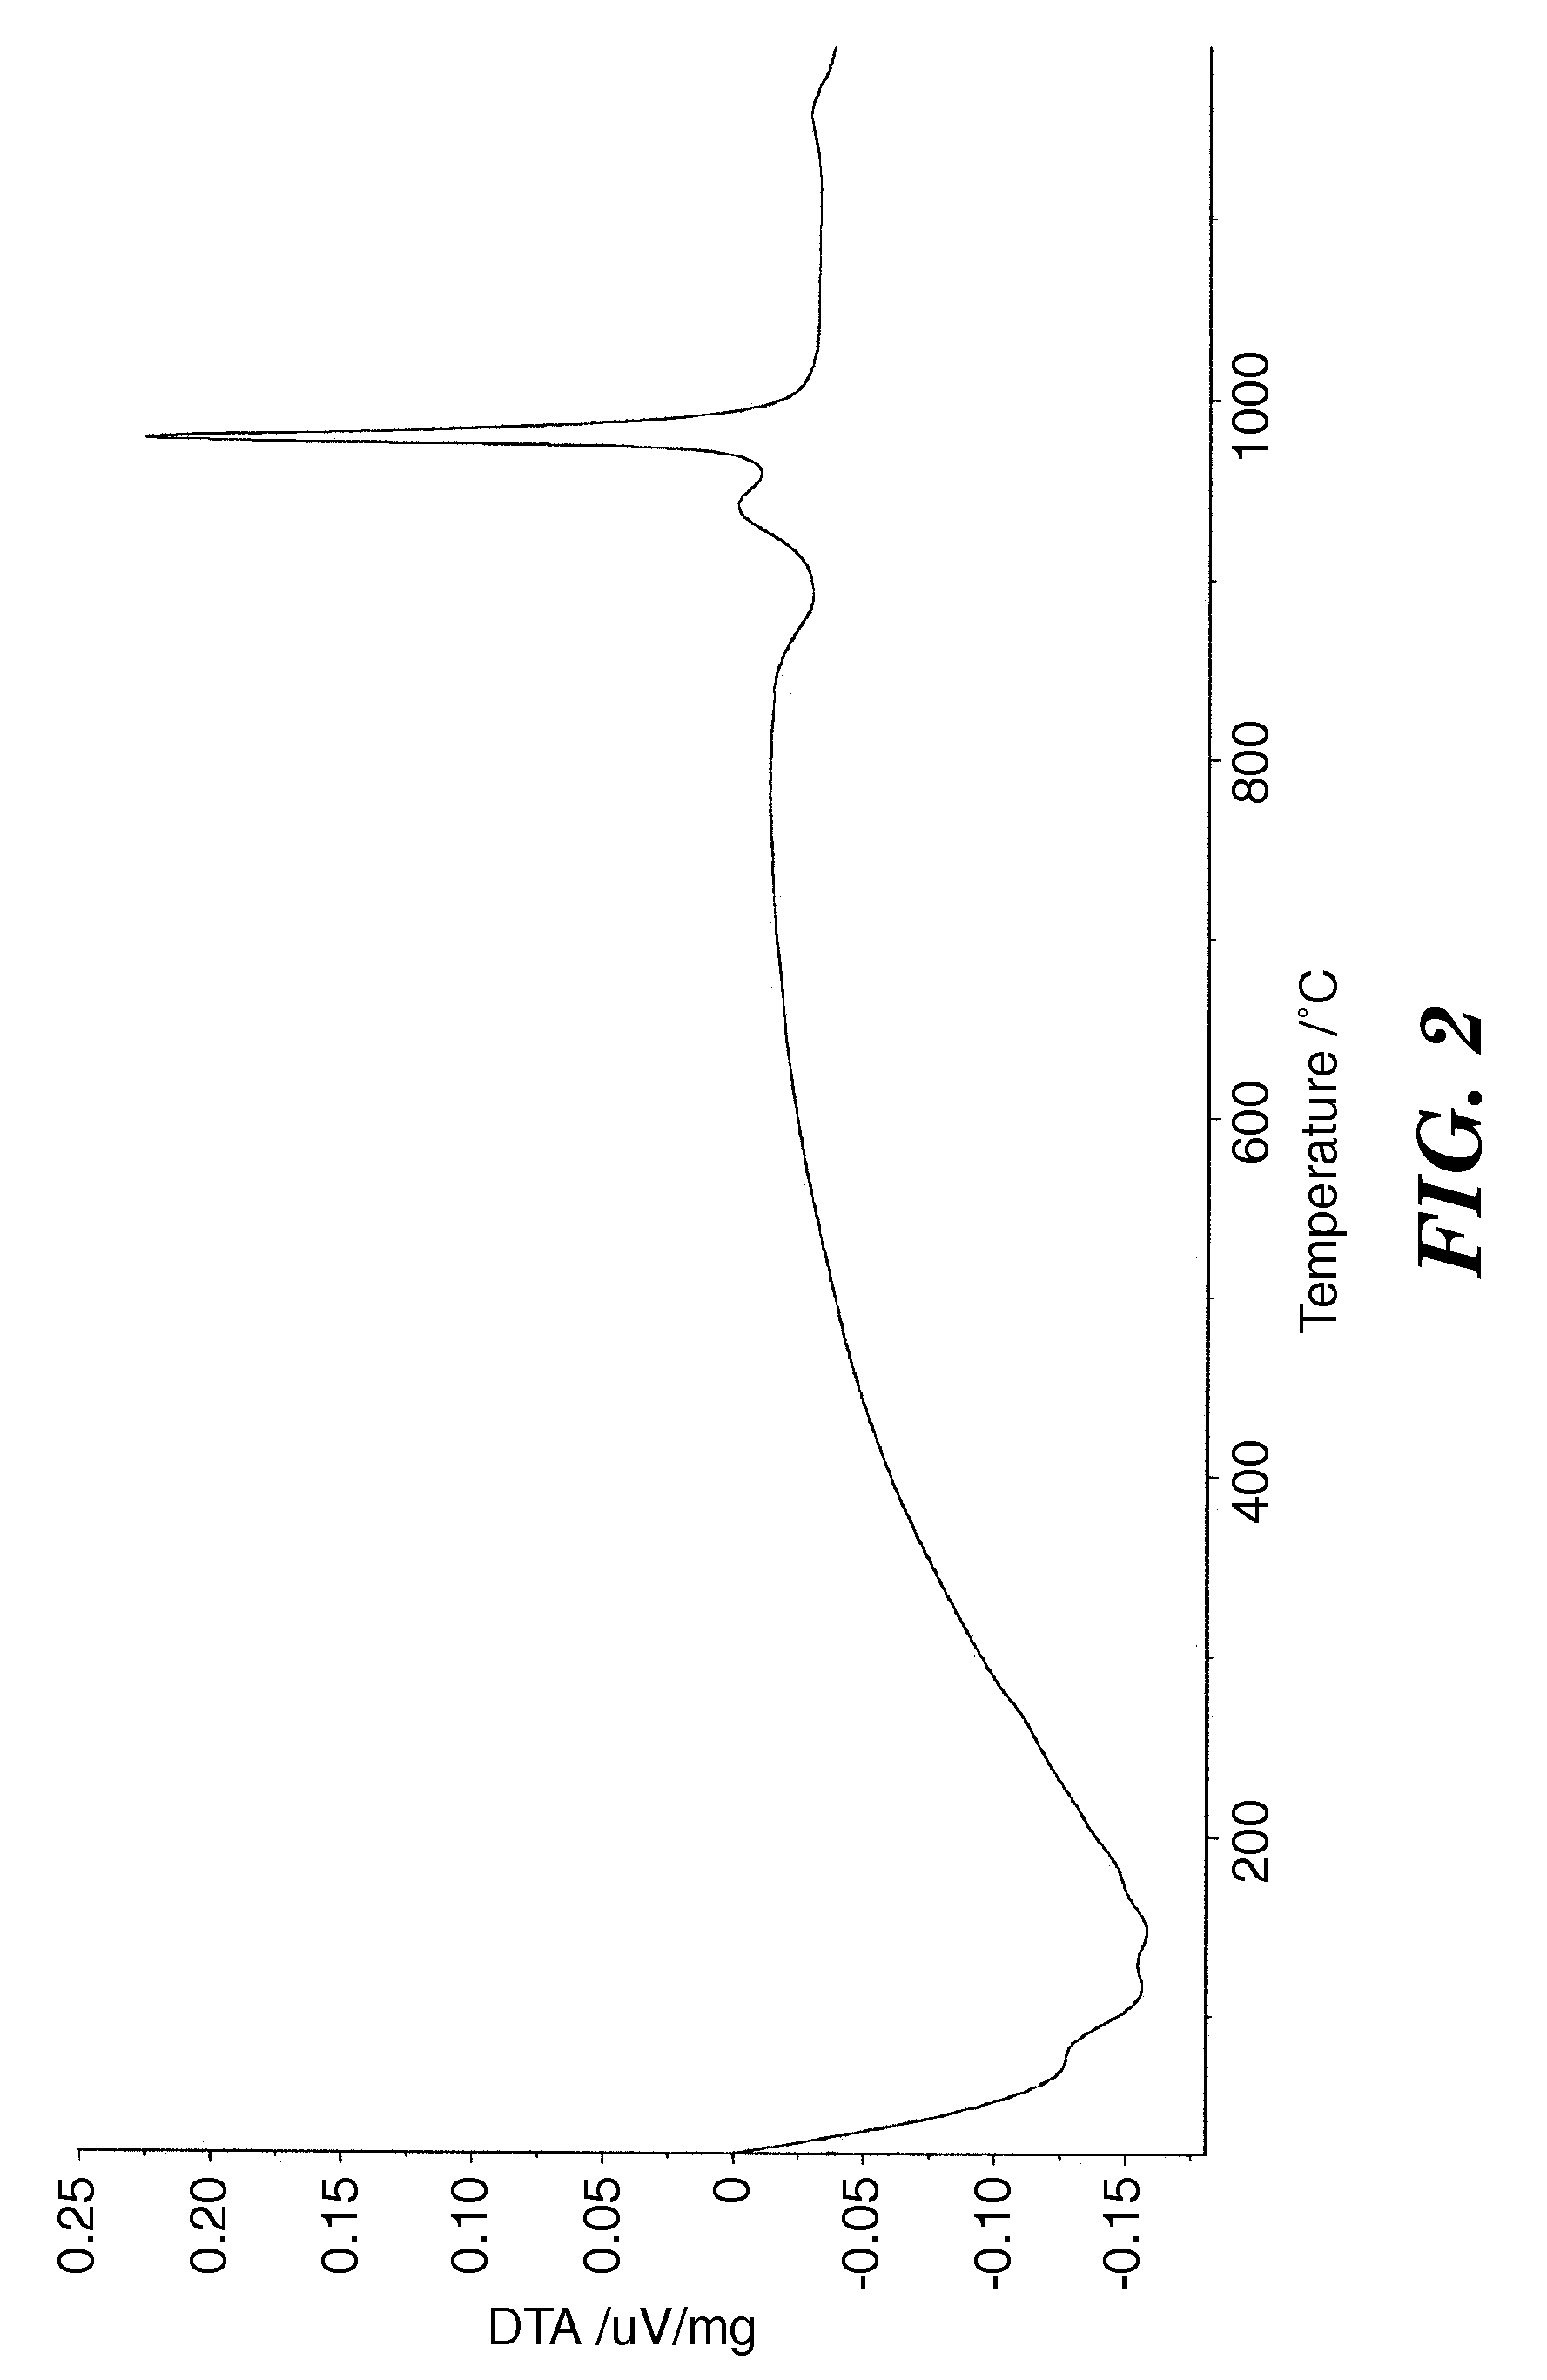 Method and article from aluminum oxide glass and articles made therefrom